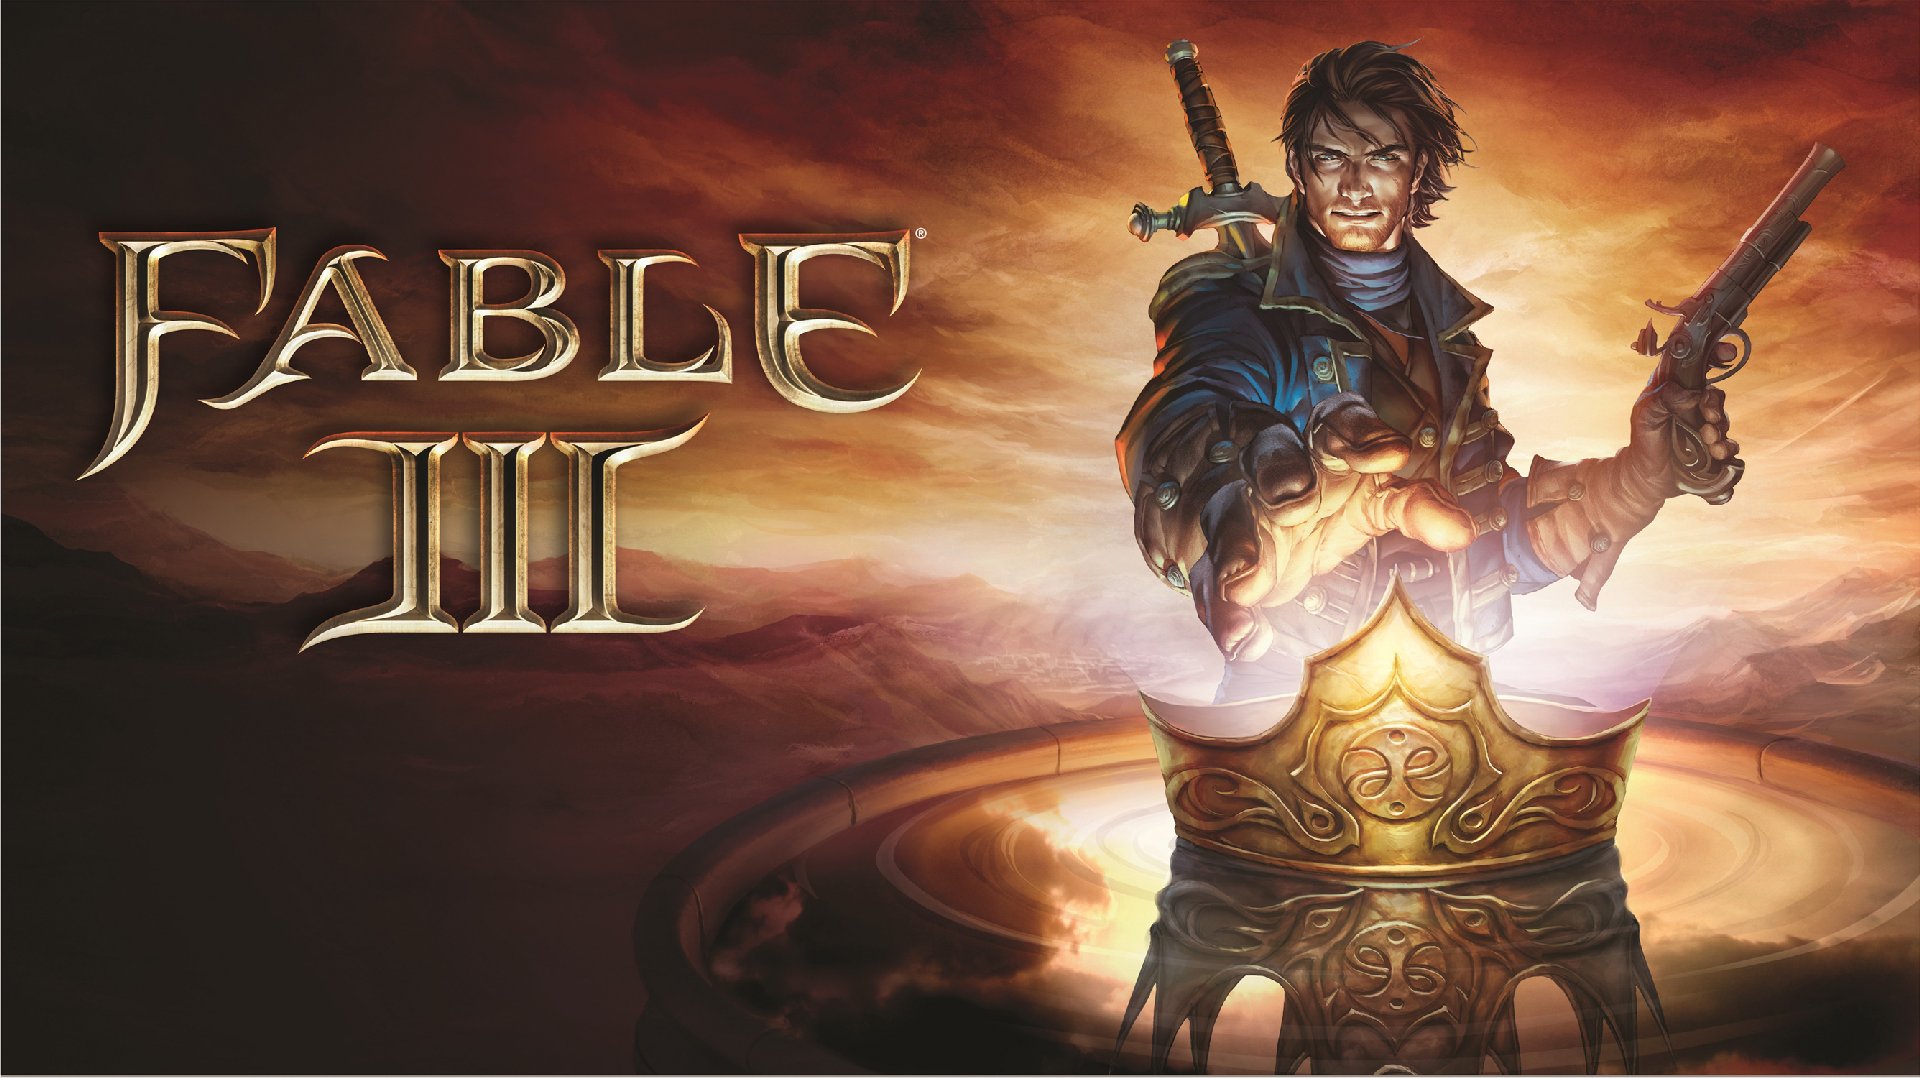 fable iii official art